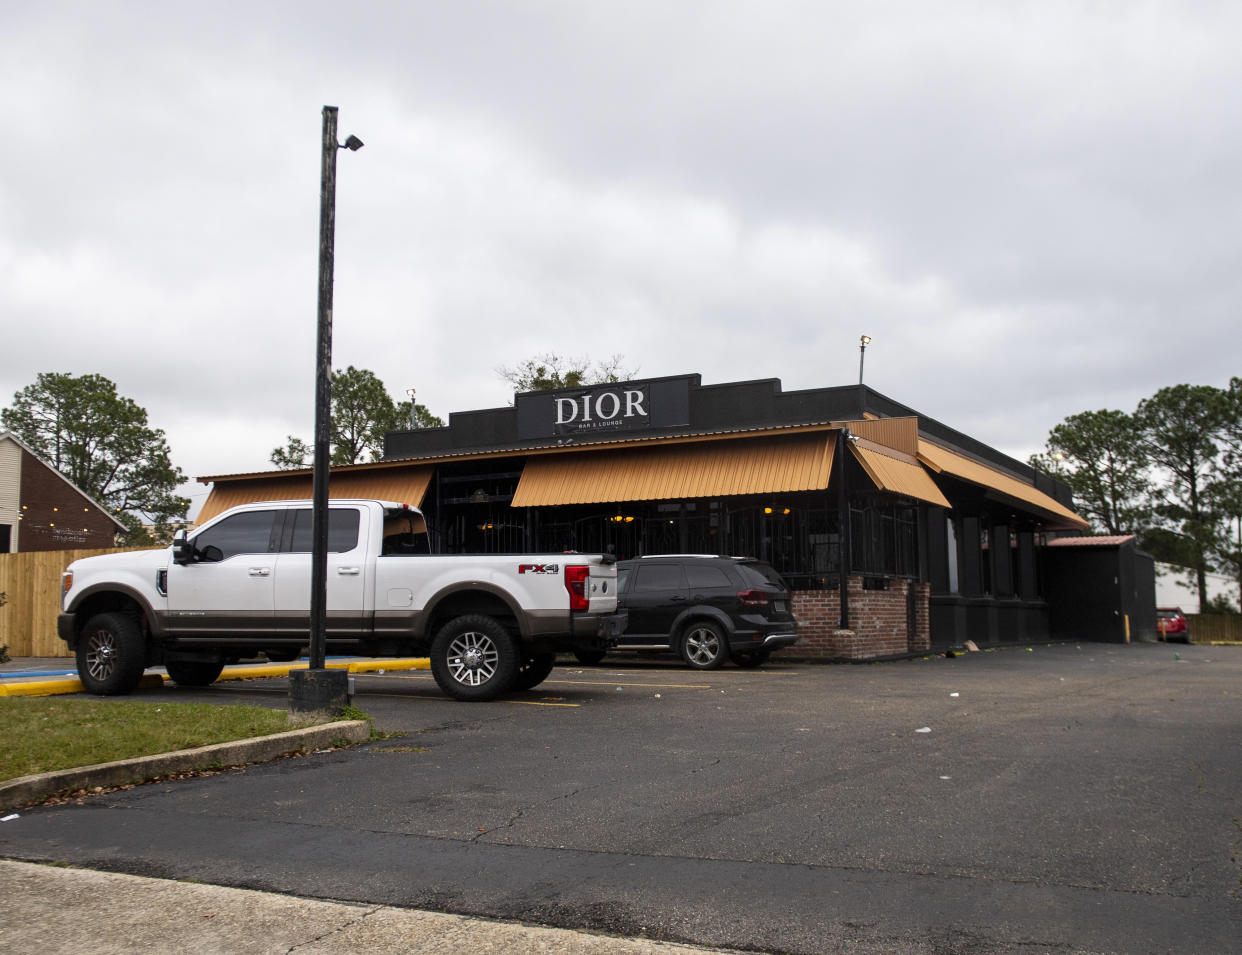 FILE - Dior Bar & Lounge on Bennington Avenue was the scene of an overnight shooting that left multiple people injured, Jan. 22, 2023, in Baton Rouge, La. On Friday, Feb. 10, police in Louisiana's capital city of Baton Rouge arrested two people for a mass shooting that left 12 others wounded at a nightclub in January. (Michael Johnson/The Advocate via AP)